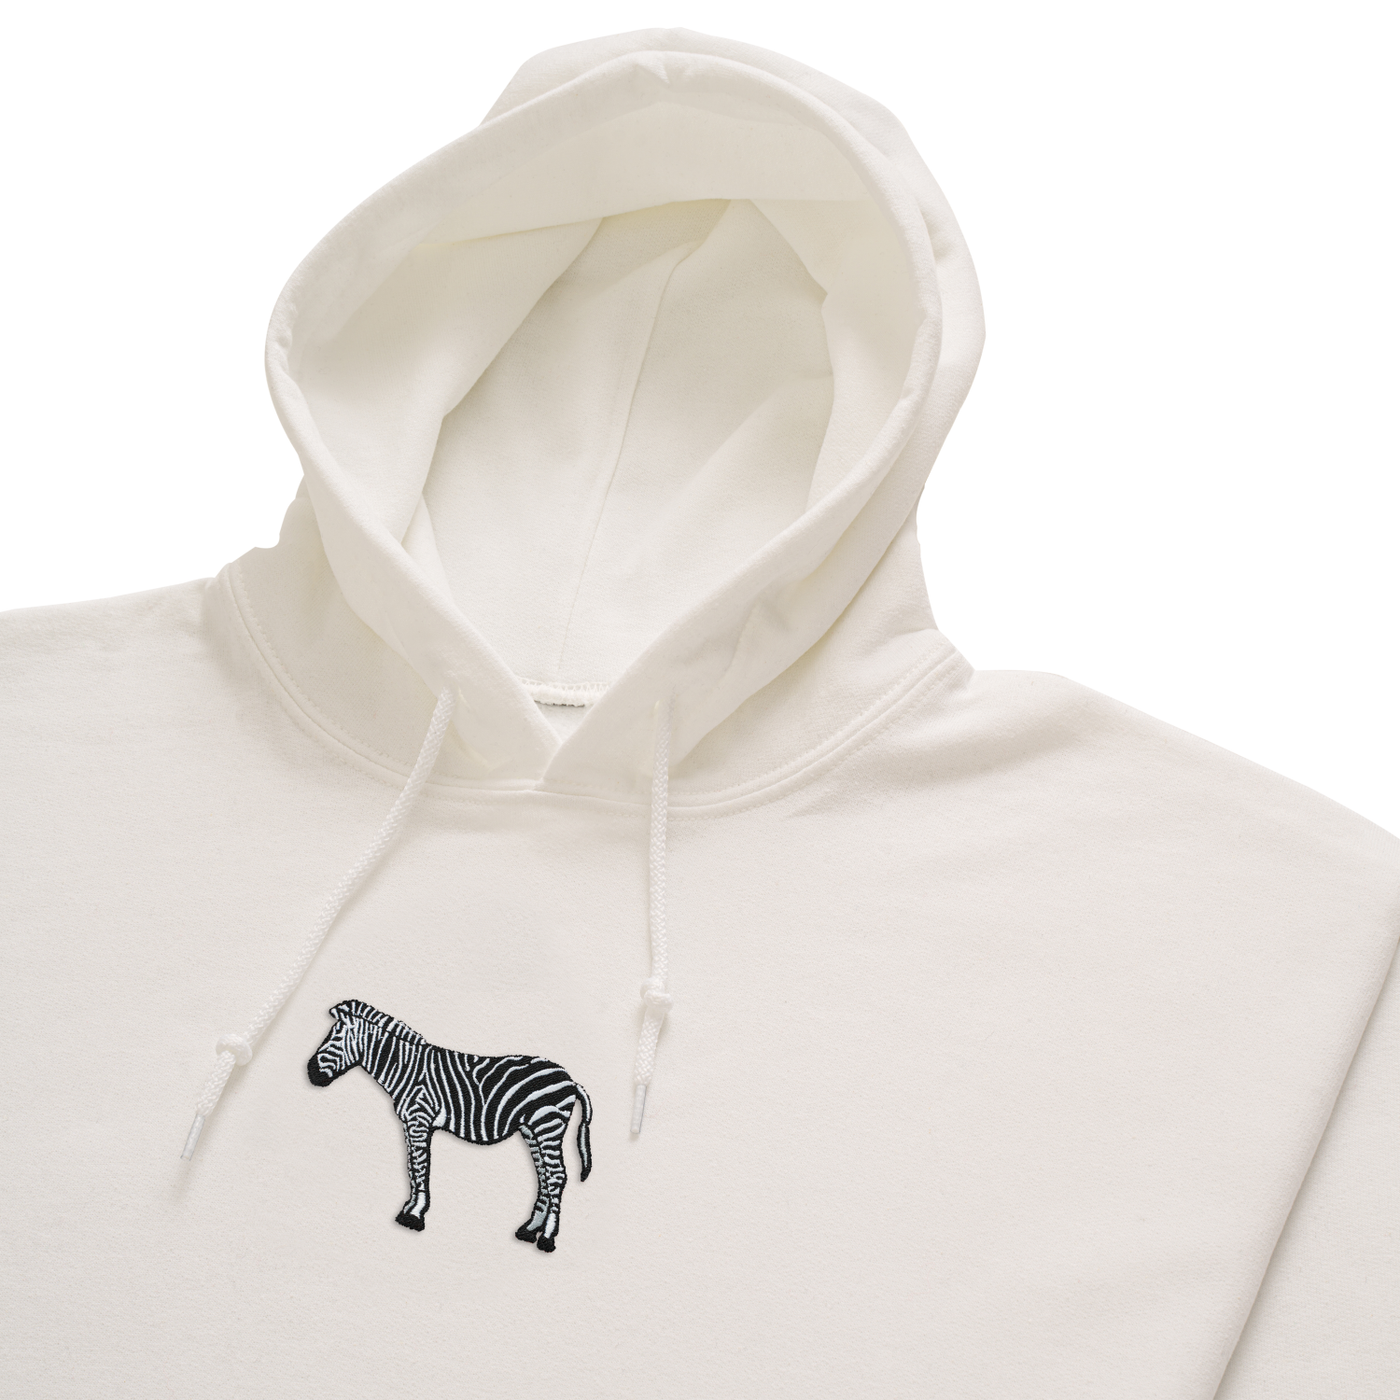 Bobby's Planet Men's Embroidered Zebra Hoodie from African Animals Collection in White Color#color_white